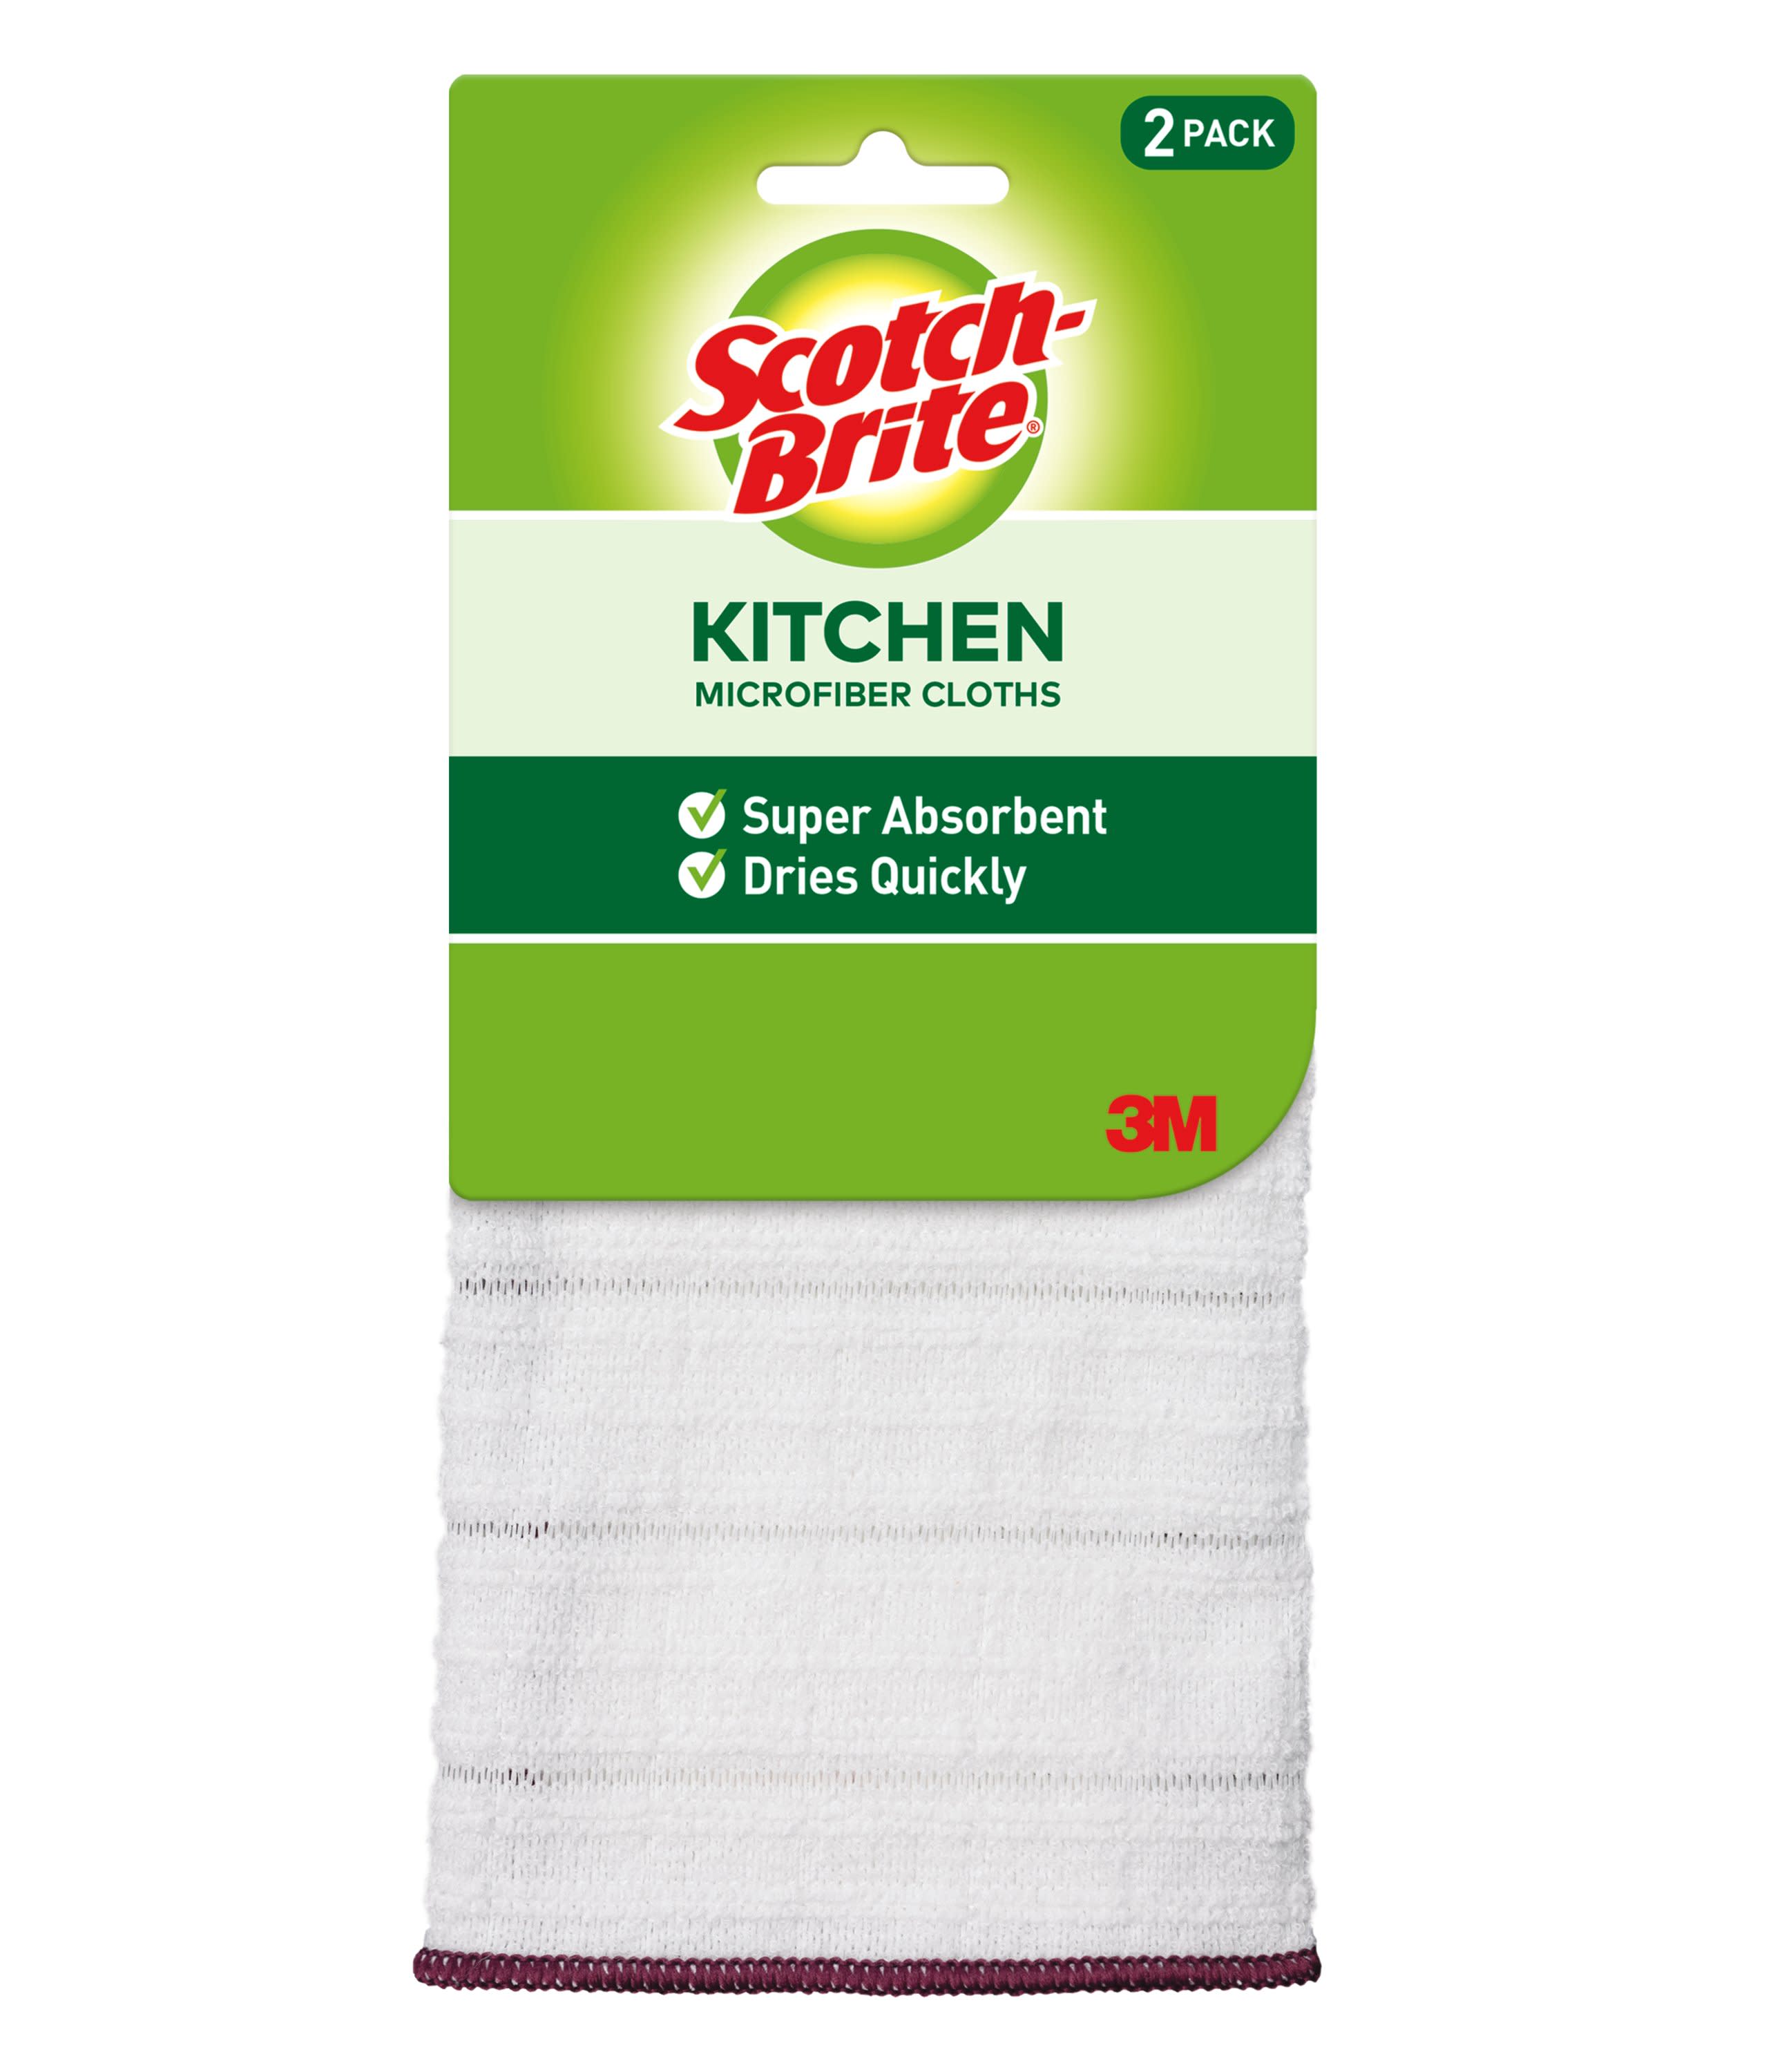 Scotch-Brite 2-Pack Microfiber Solid Any Occasion Kitchen Towel in